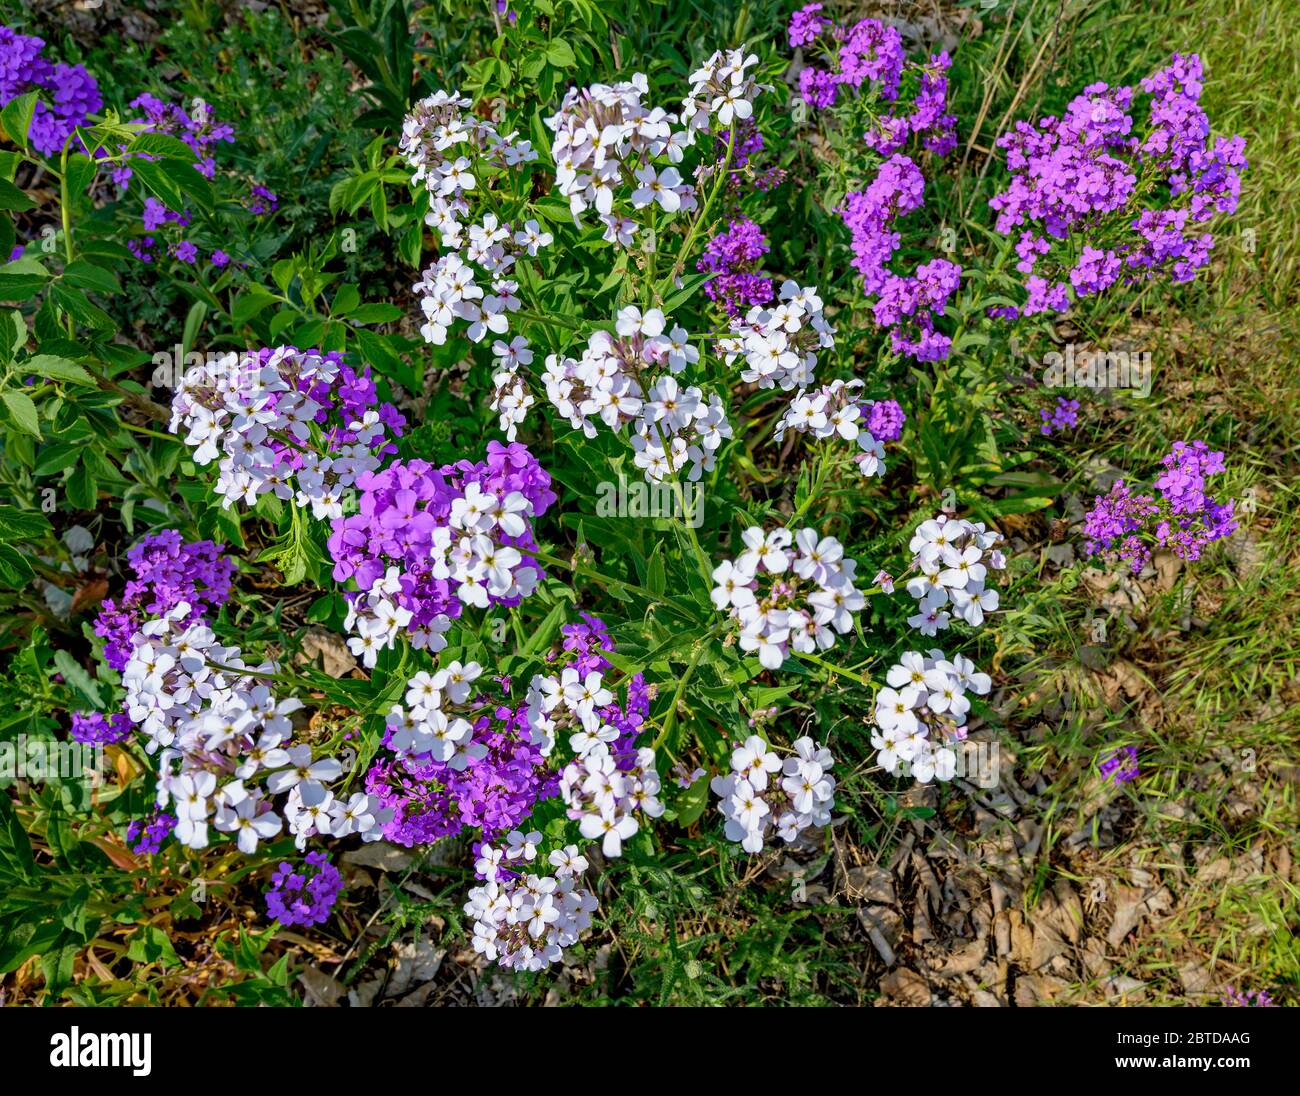 white and lilac blossoms of a wallflower plant in sunshine at the edge of a meadow Stock Photo